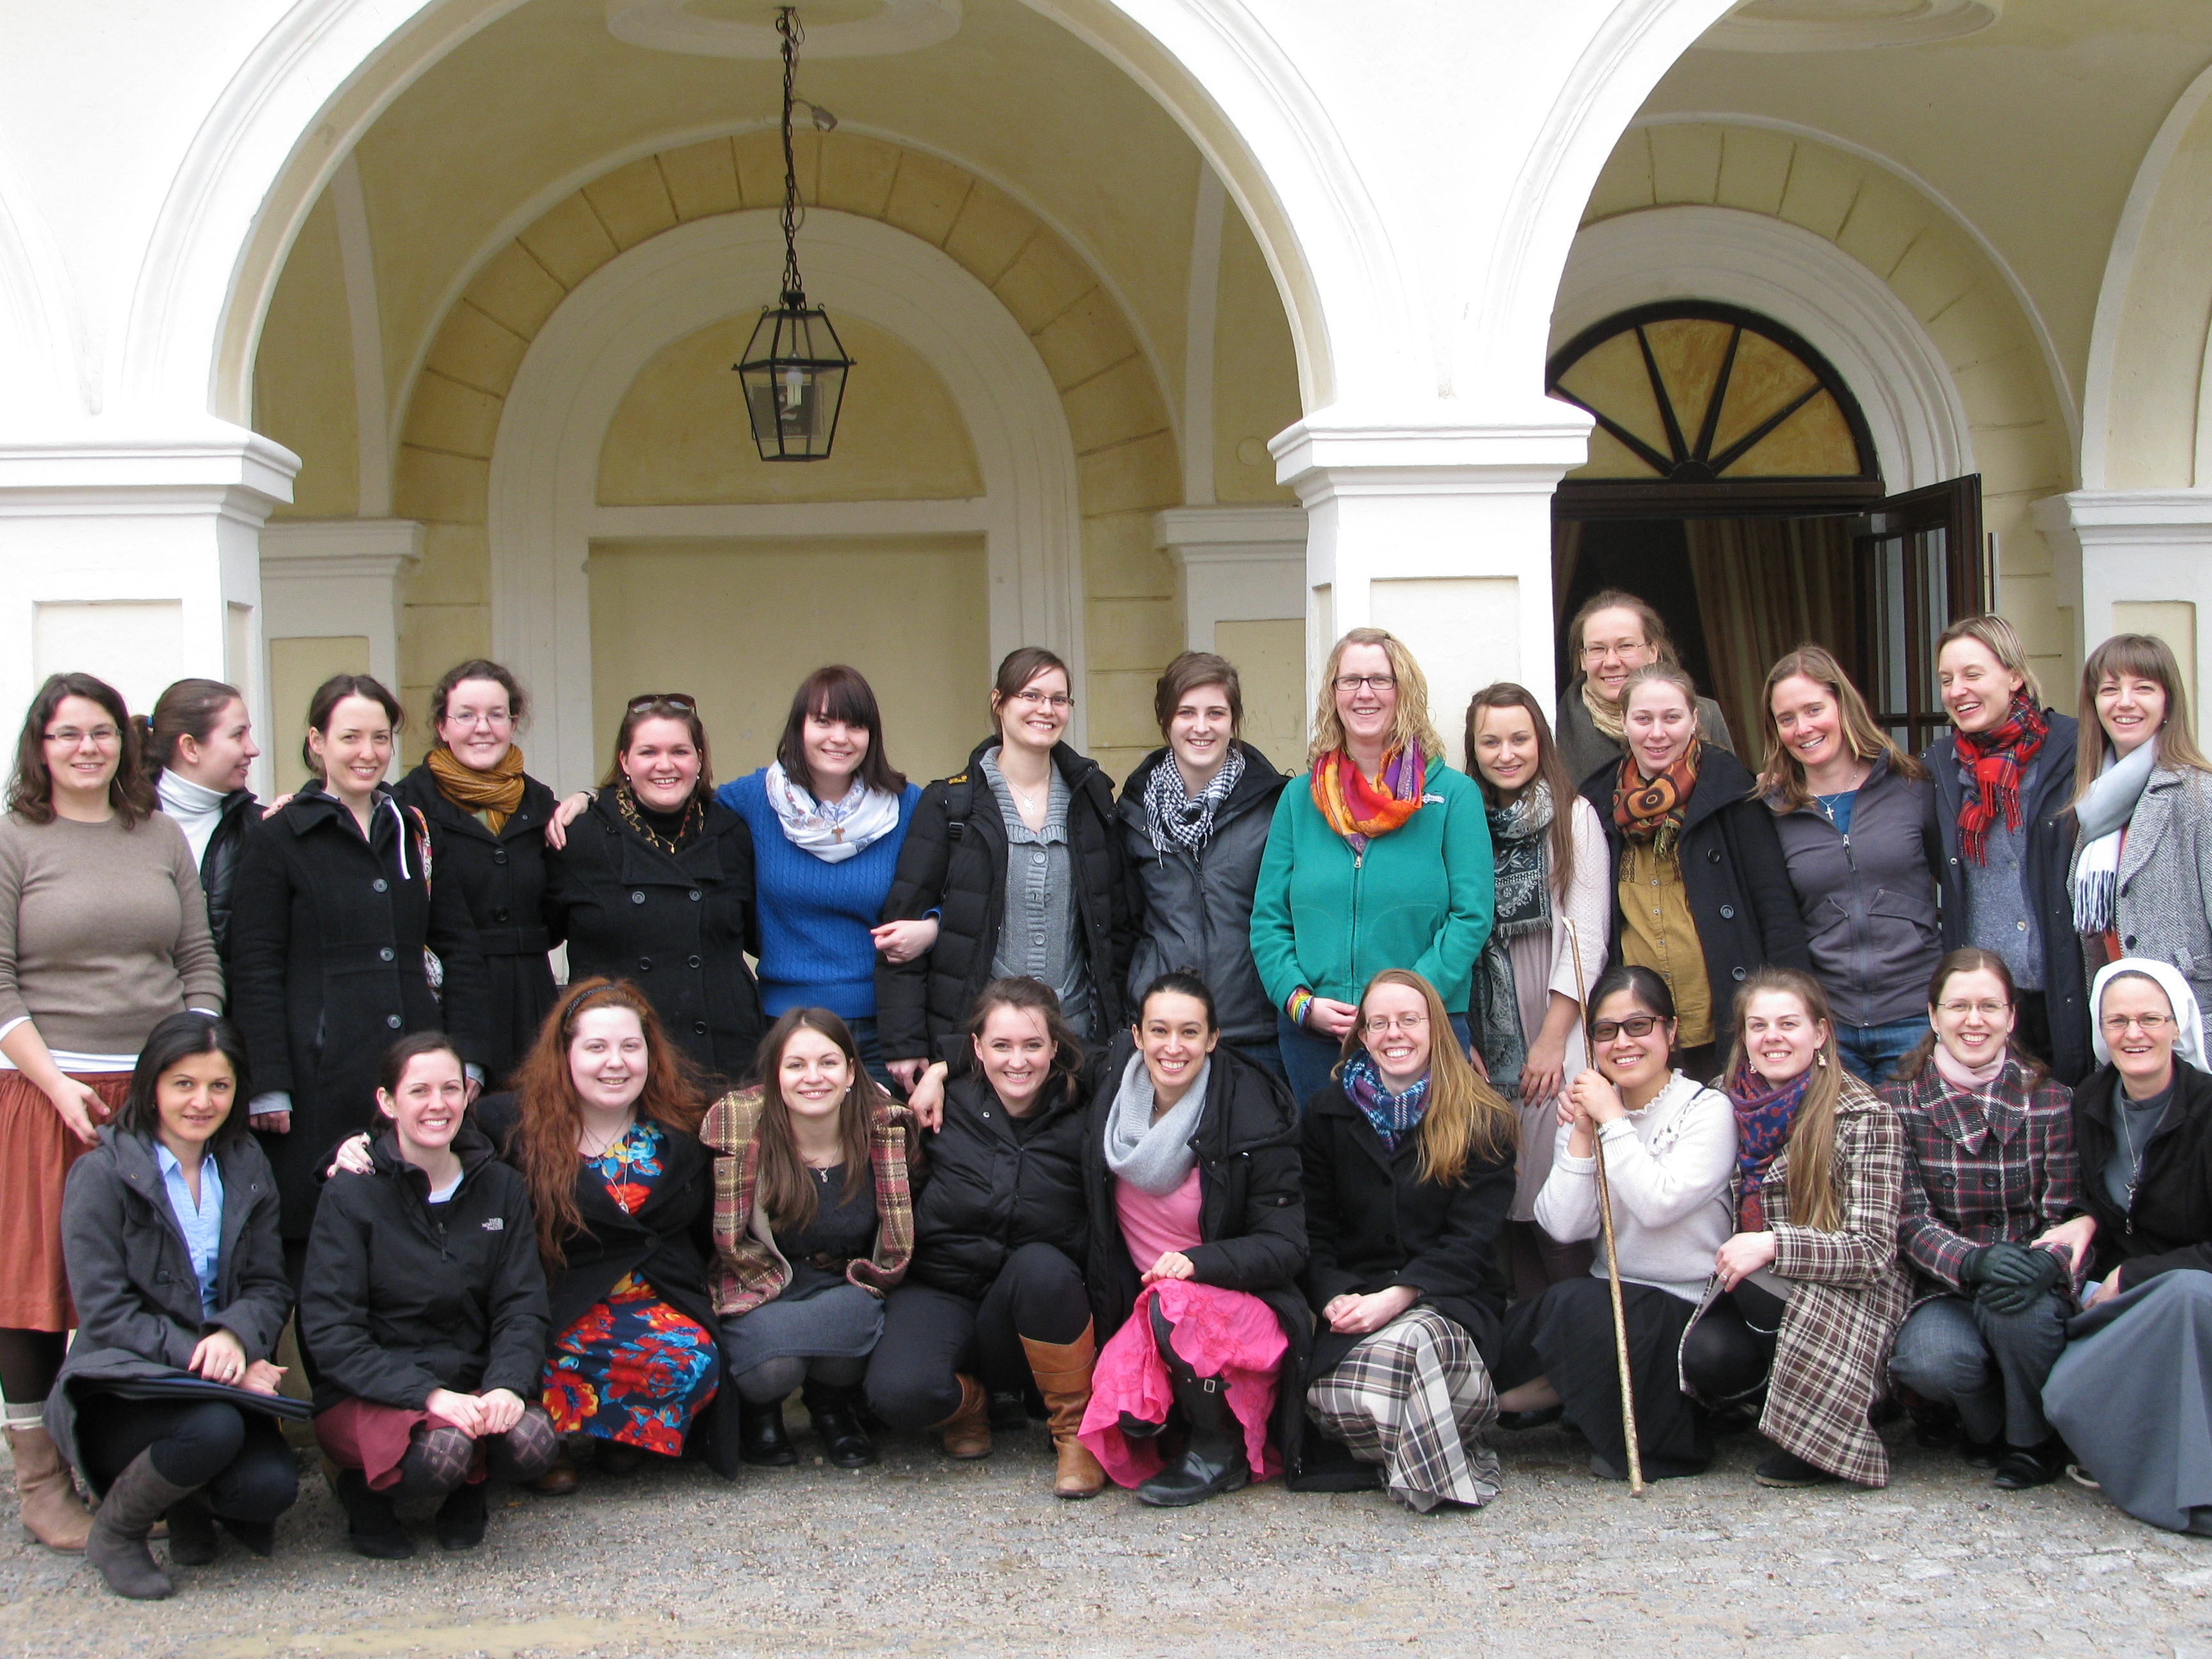 The participants in the ITI Lenten women's retreat pose in front of the Kartause in Gaming, Austria